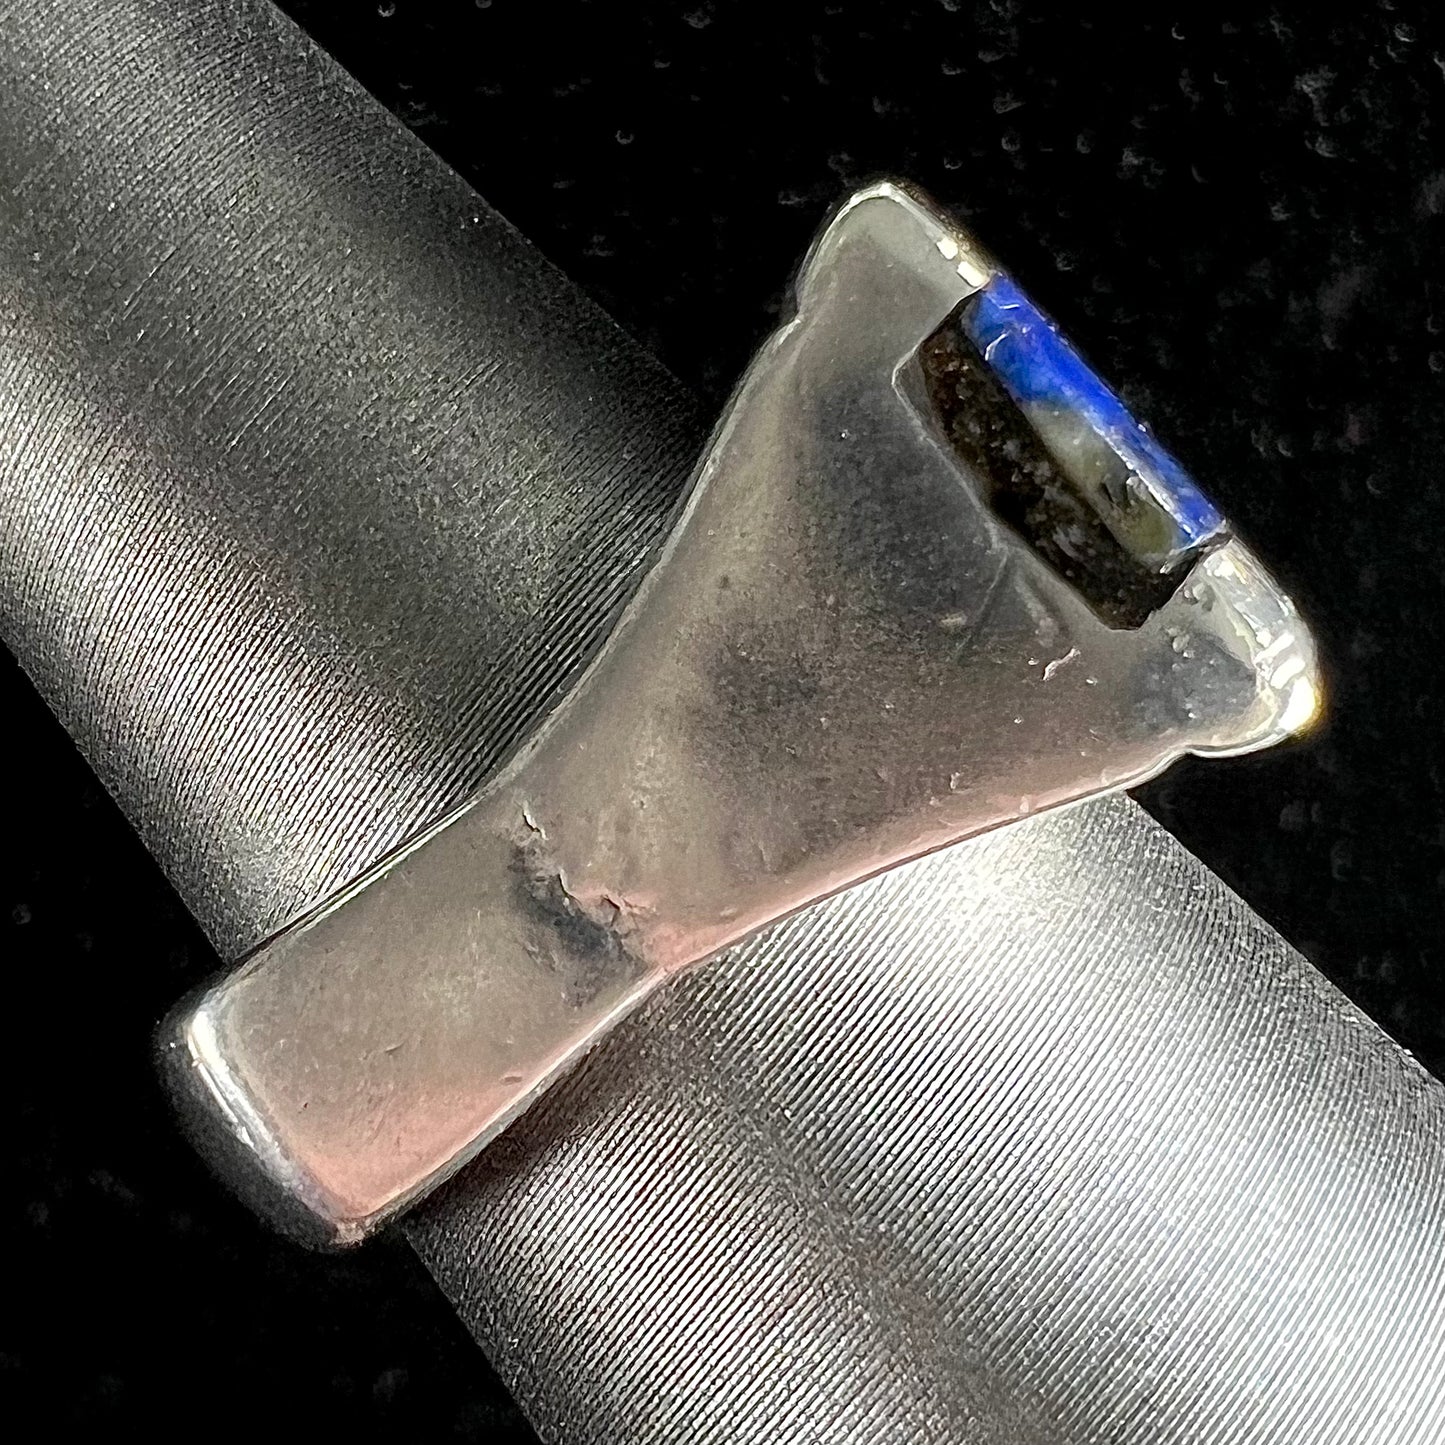 A sterling silver ring inlaid with a piece of lapis lazuli.  A small crack runs through the piece of lapis.